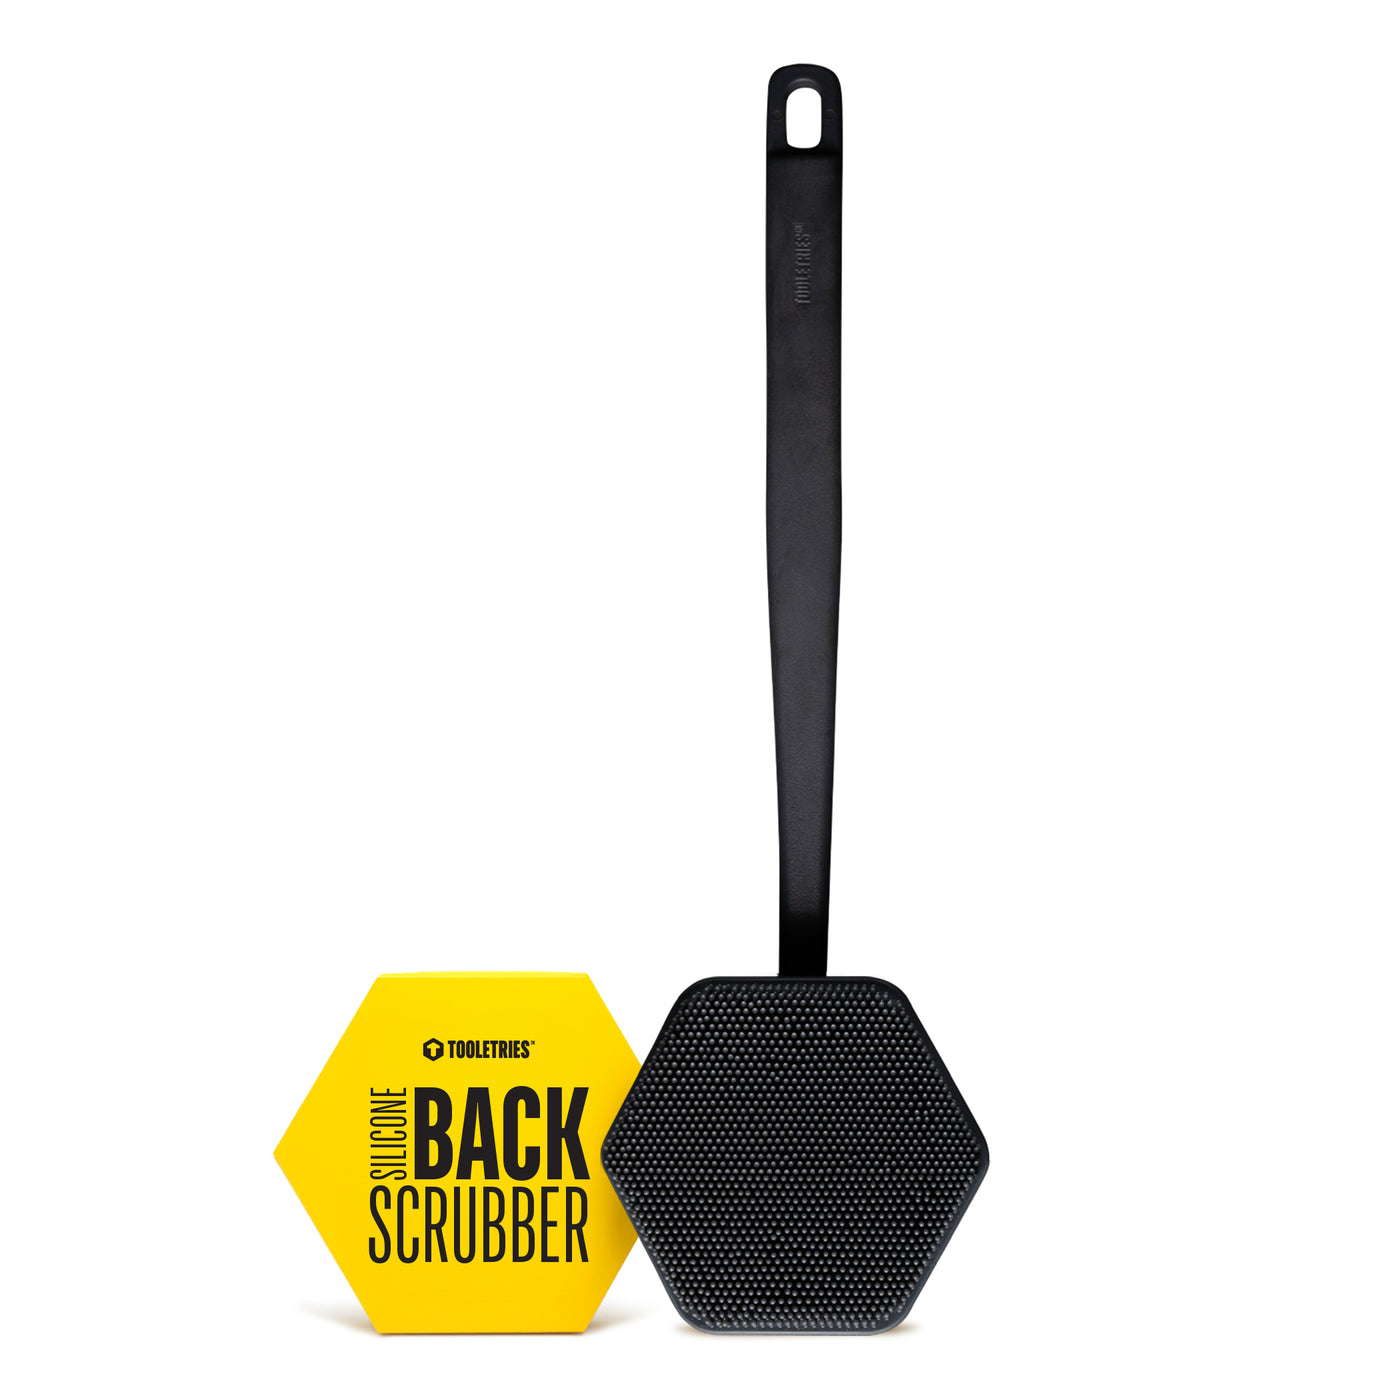 The Back Scrubber